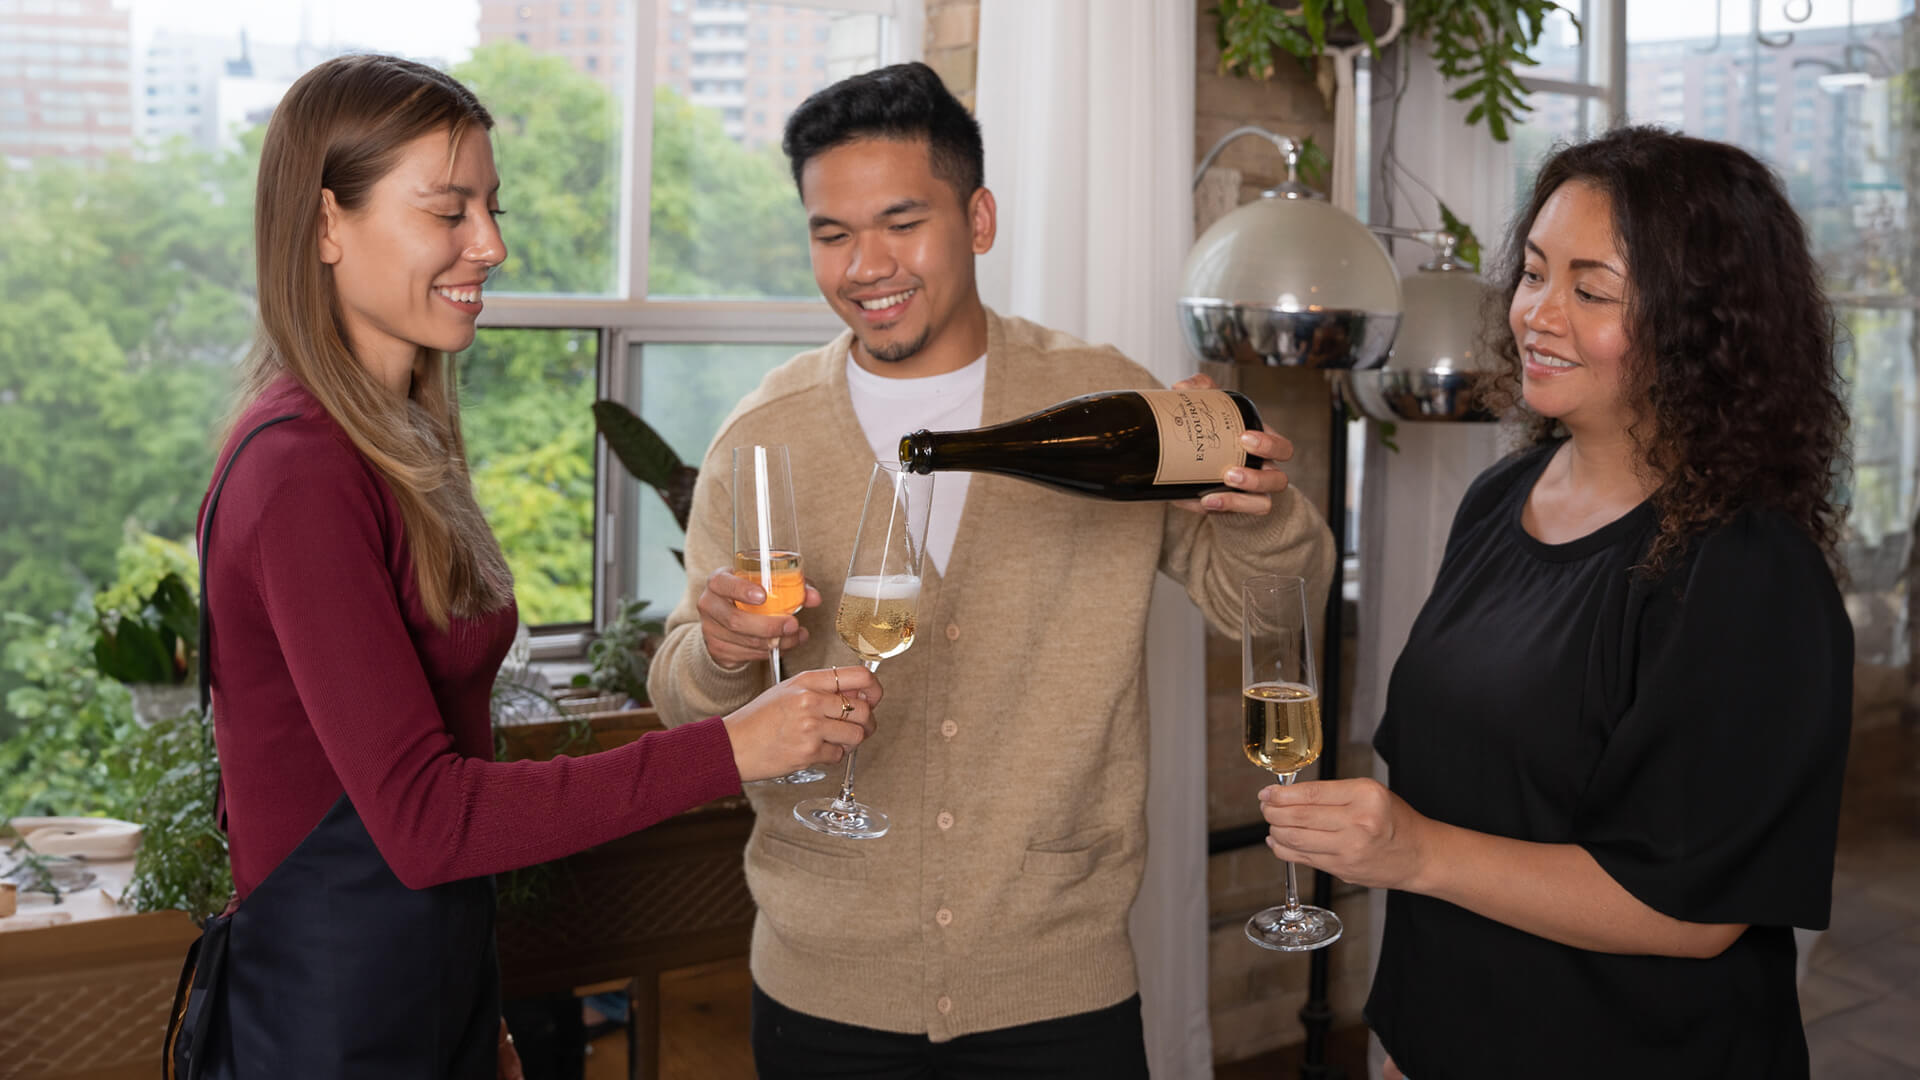 Wine lovers pouring a glass of Jackson-Triggs Entourage Grand Reserve Brut Sparkling Wine.